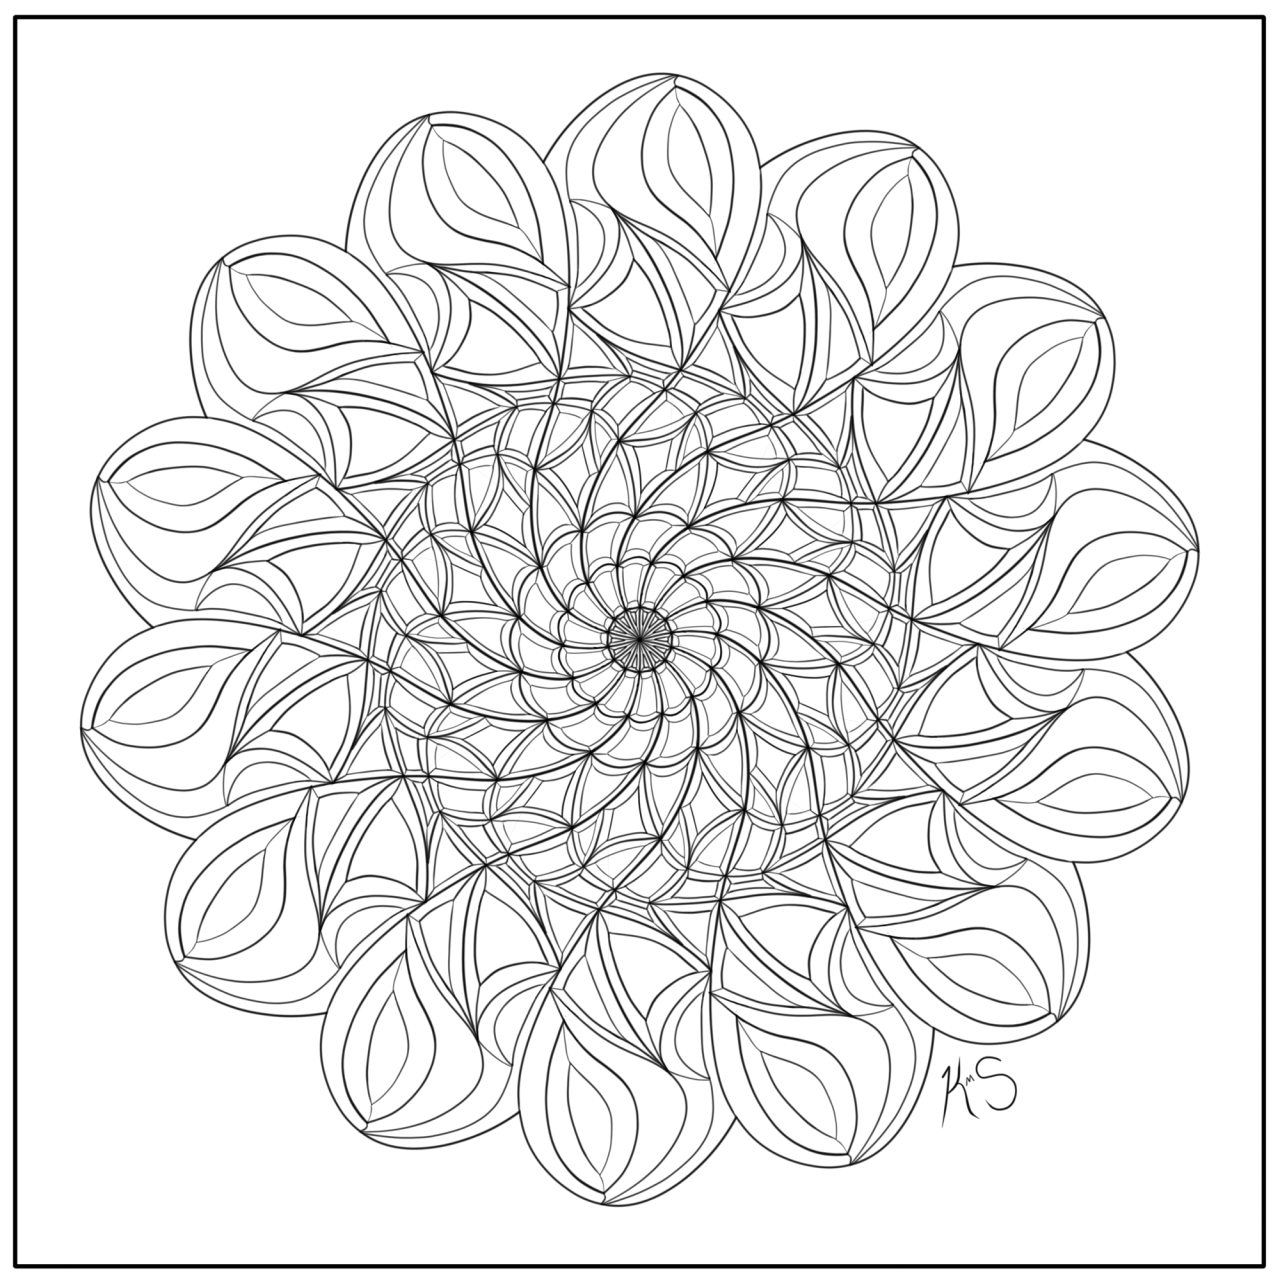 Mindful Moments  Mandala Coloring Pages For Relaxation And Inner Peace Mandala Relaxation Coloring Page